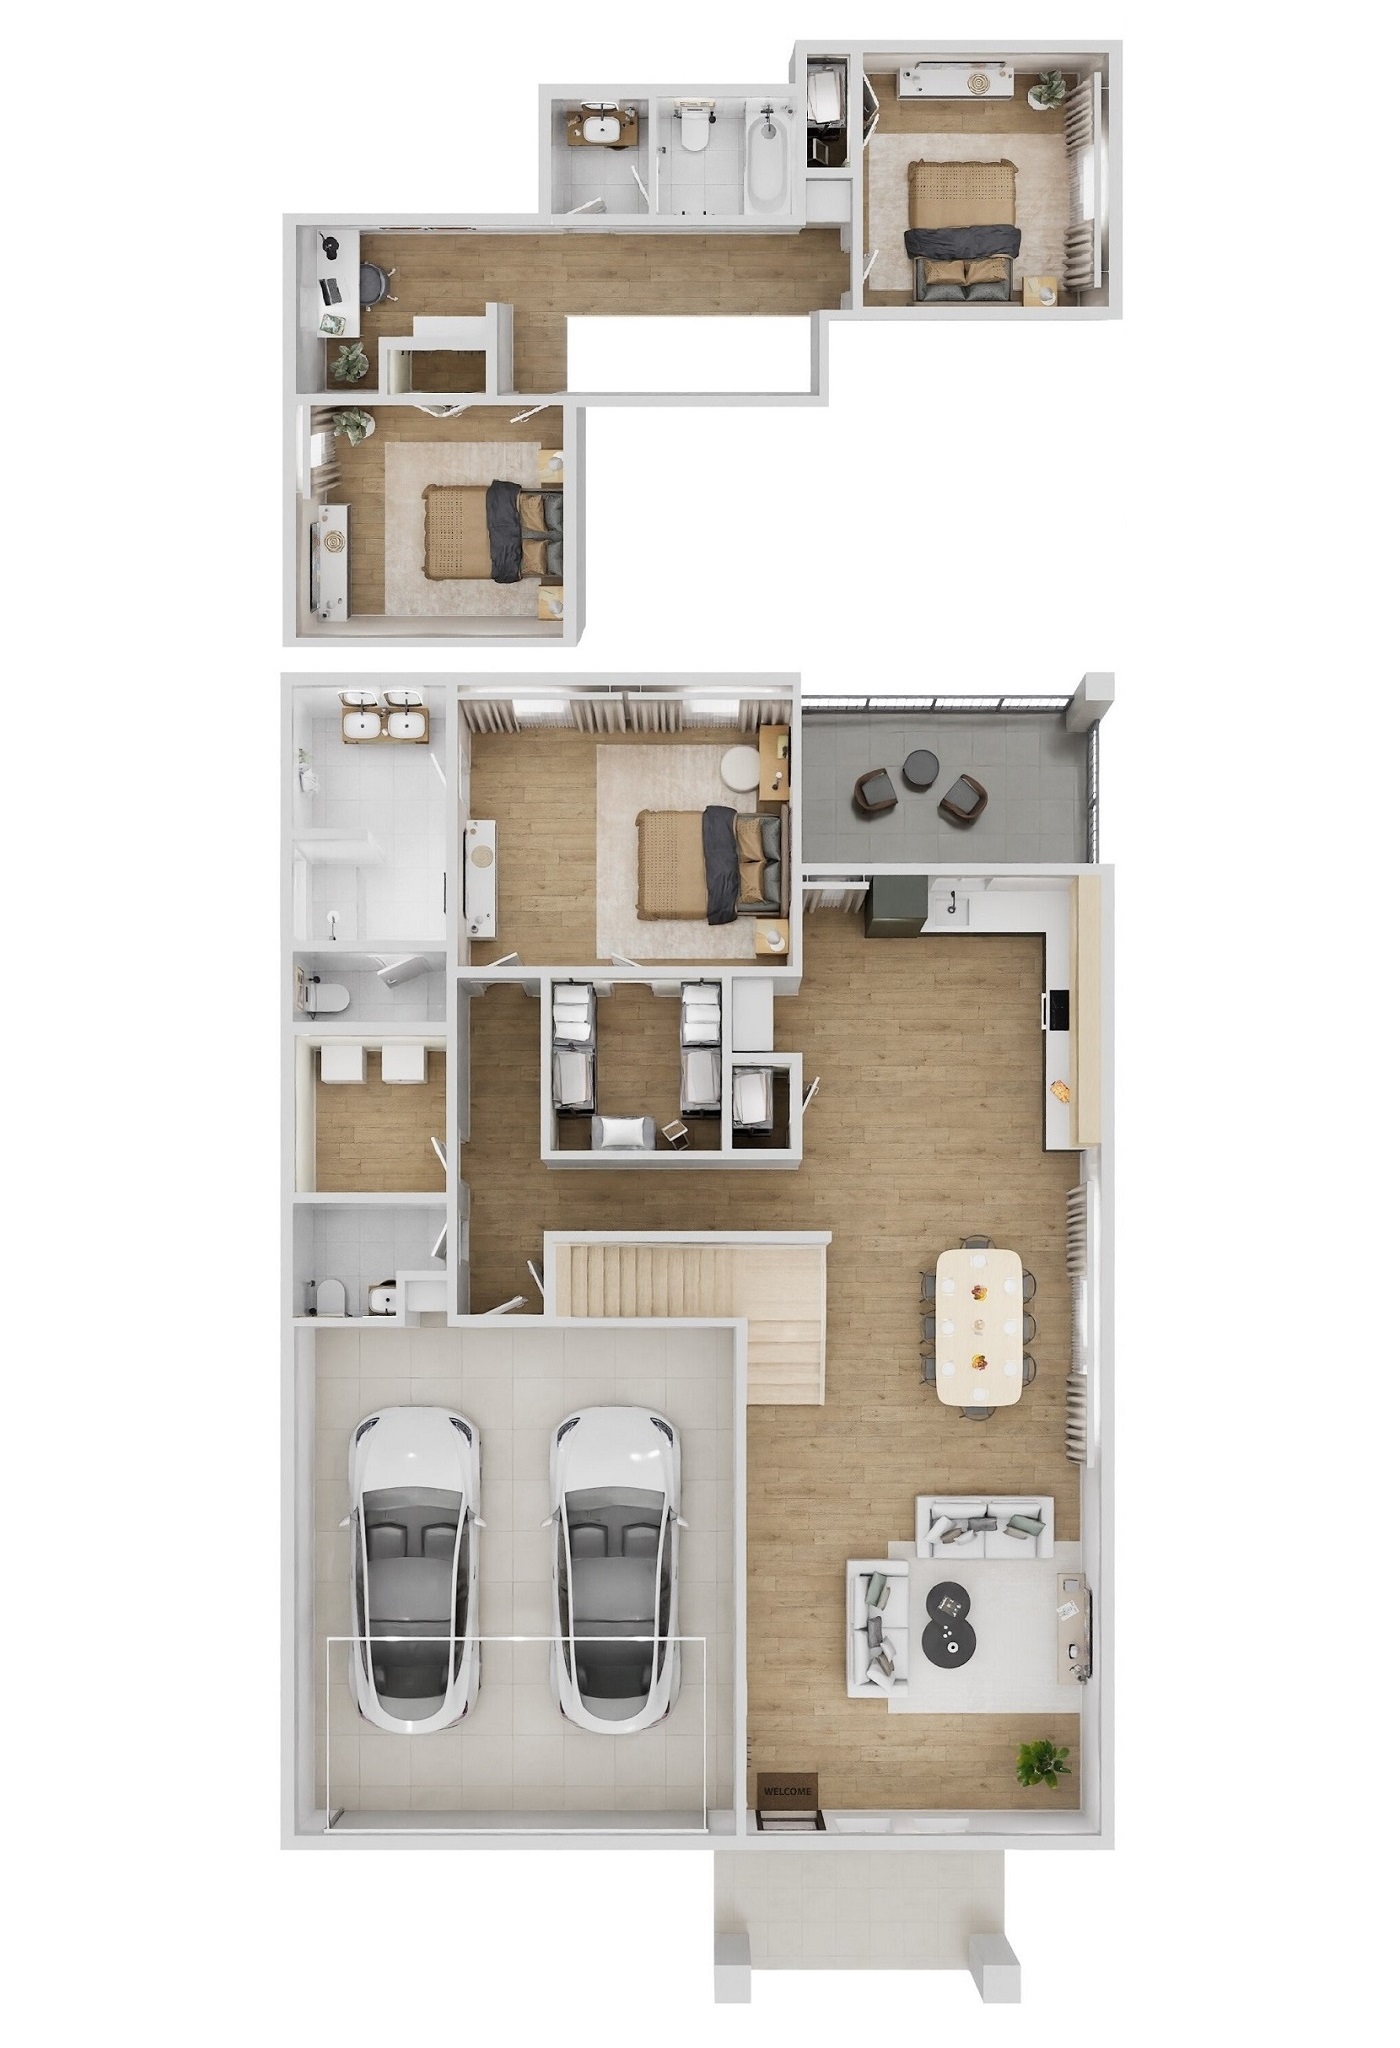 Floor plan layout for Cypress